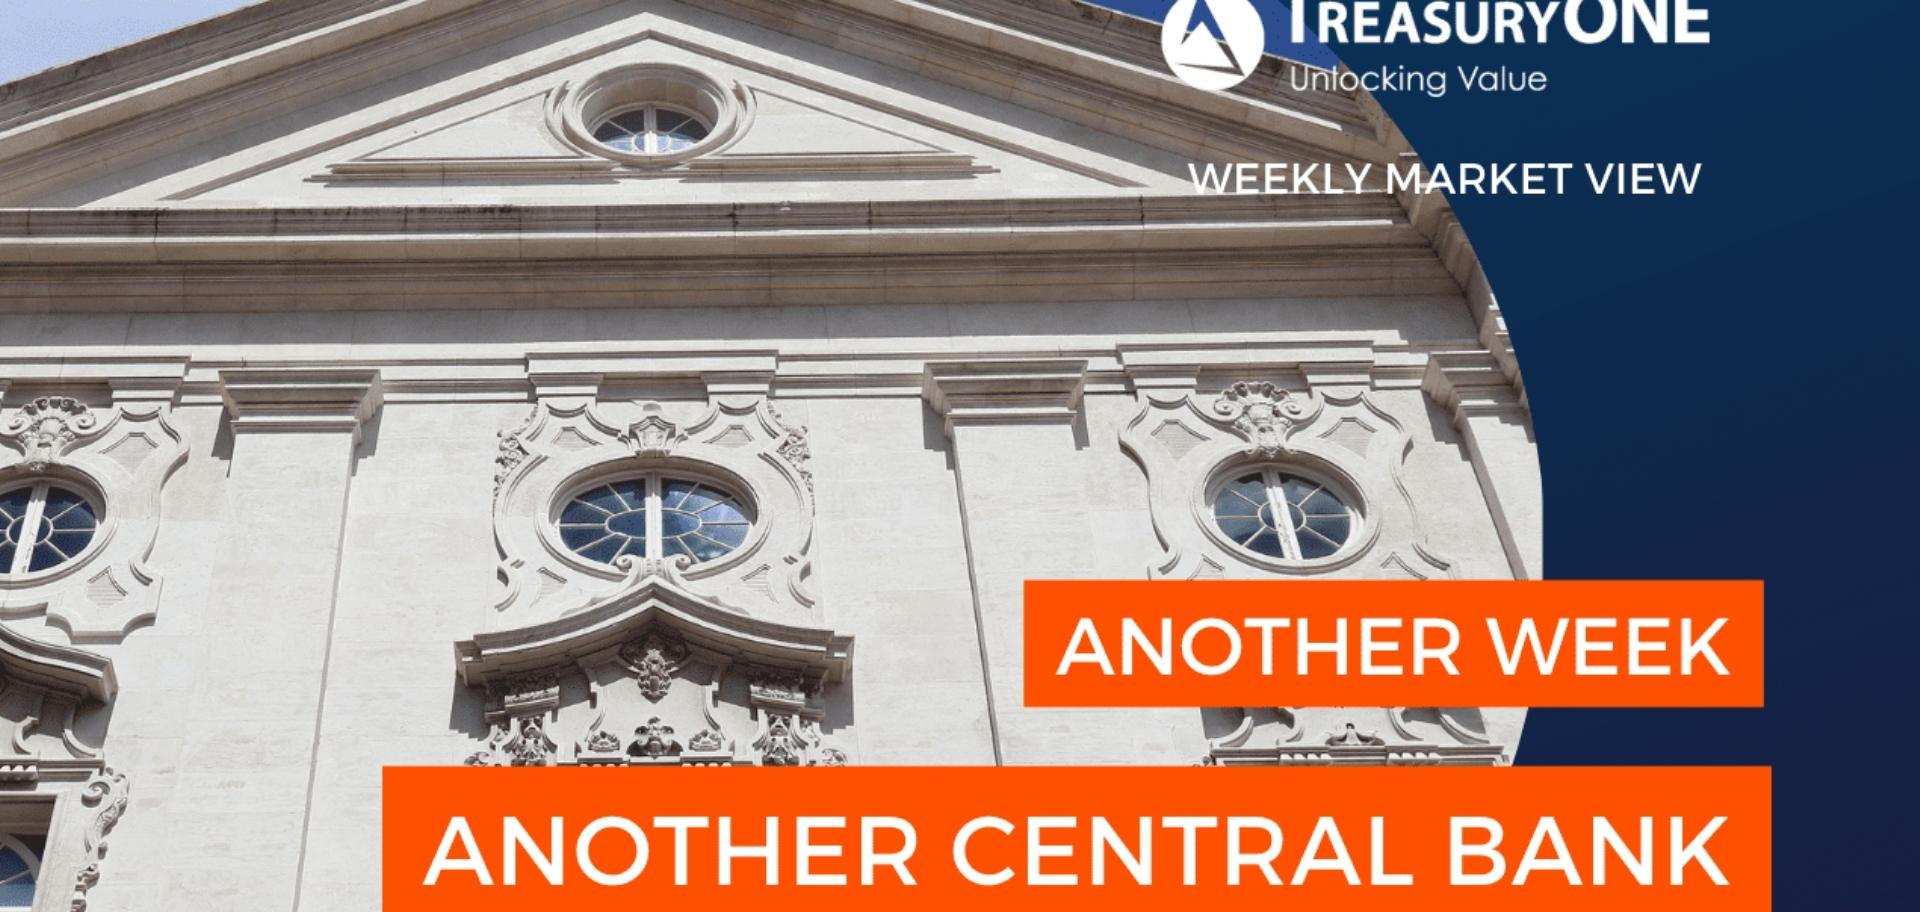 Another week, another central bank